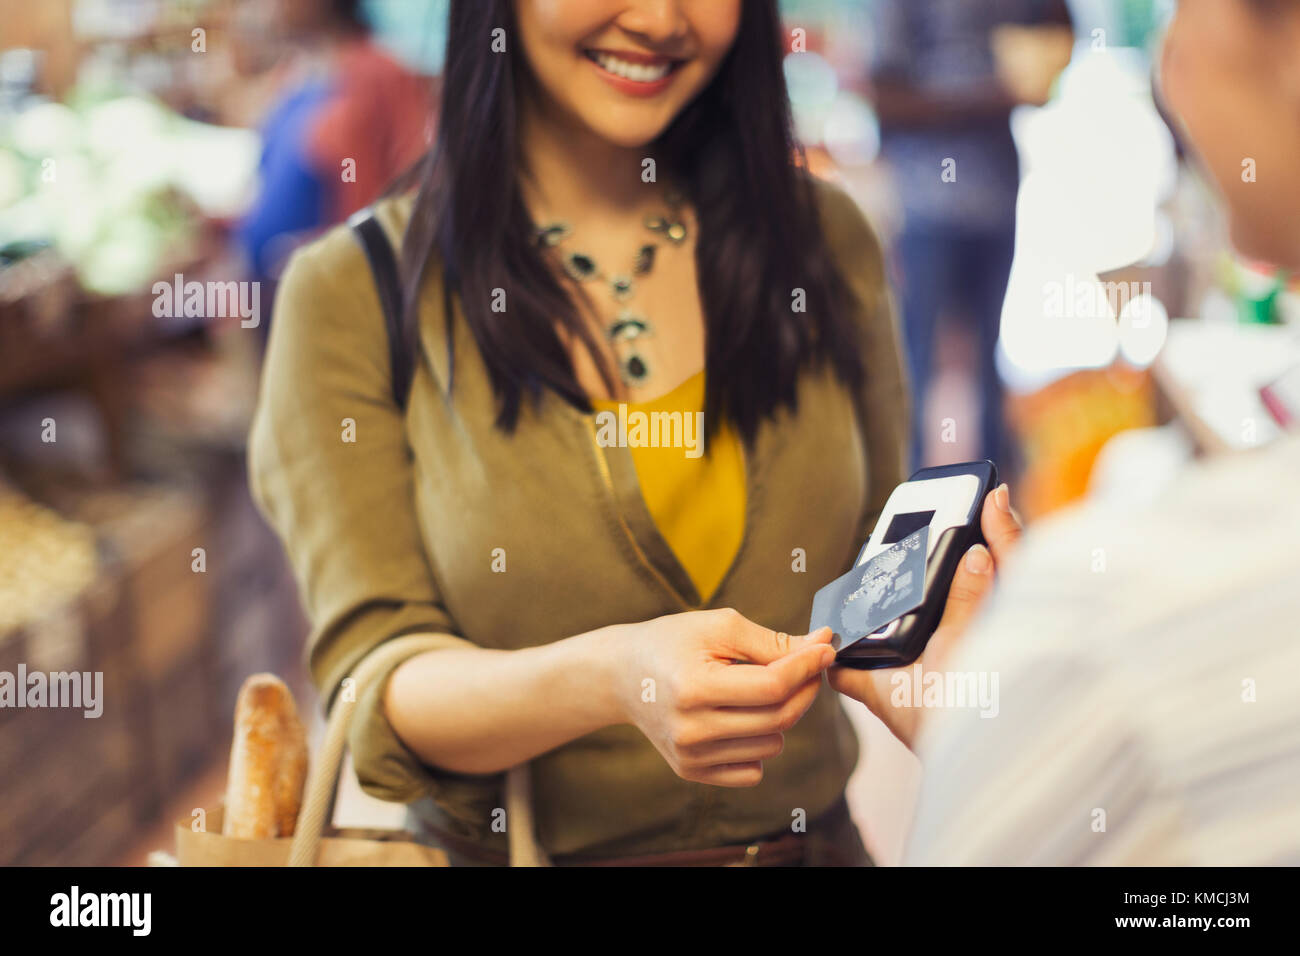 Young woman paying cashier with contactless credit card payment in store Stock Photo